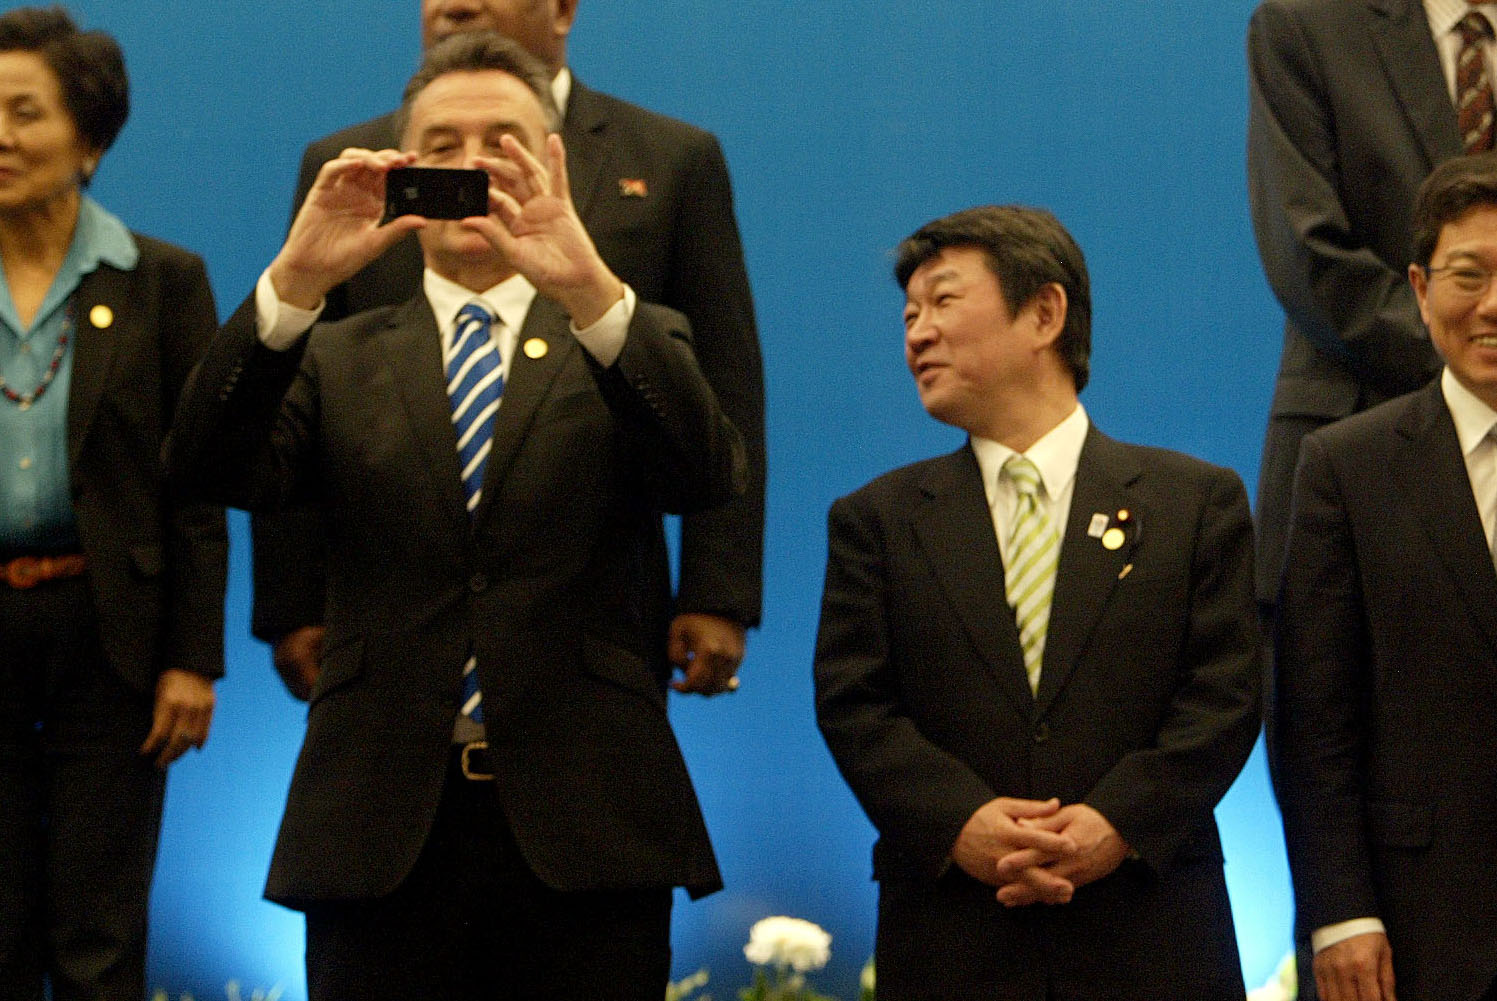 Inside looking out: Australian trade minister Craig Emerson takes a photo with his mobile phone as his Japanese counterpart, Toshimitsu Motegi, looks on during a photo session after the APEC trade ministers' meeting in Surabaya, Indonesia, on Saturday. | AFP-JIJI